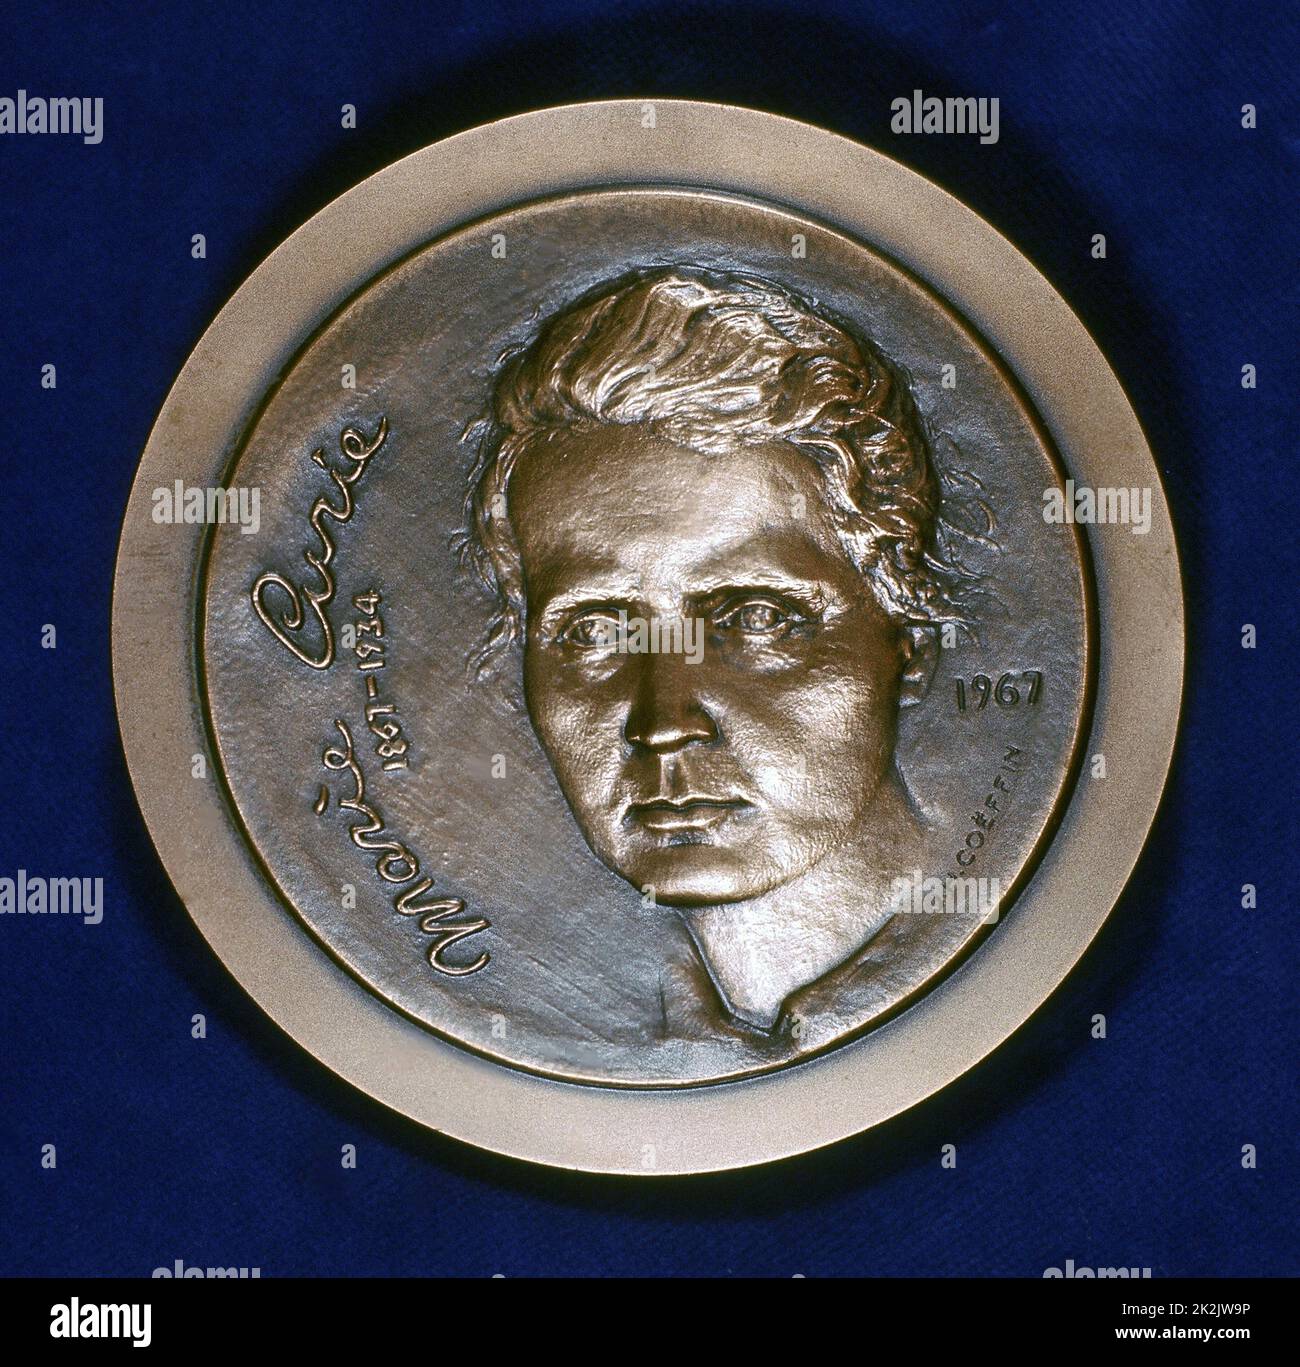 Marie Sklodowska Curie (1867-1934) Polish-born French physicist. Obverse of medal issued in 1967 to commemorate the centenary of her birth. Stock Photo